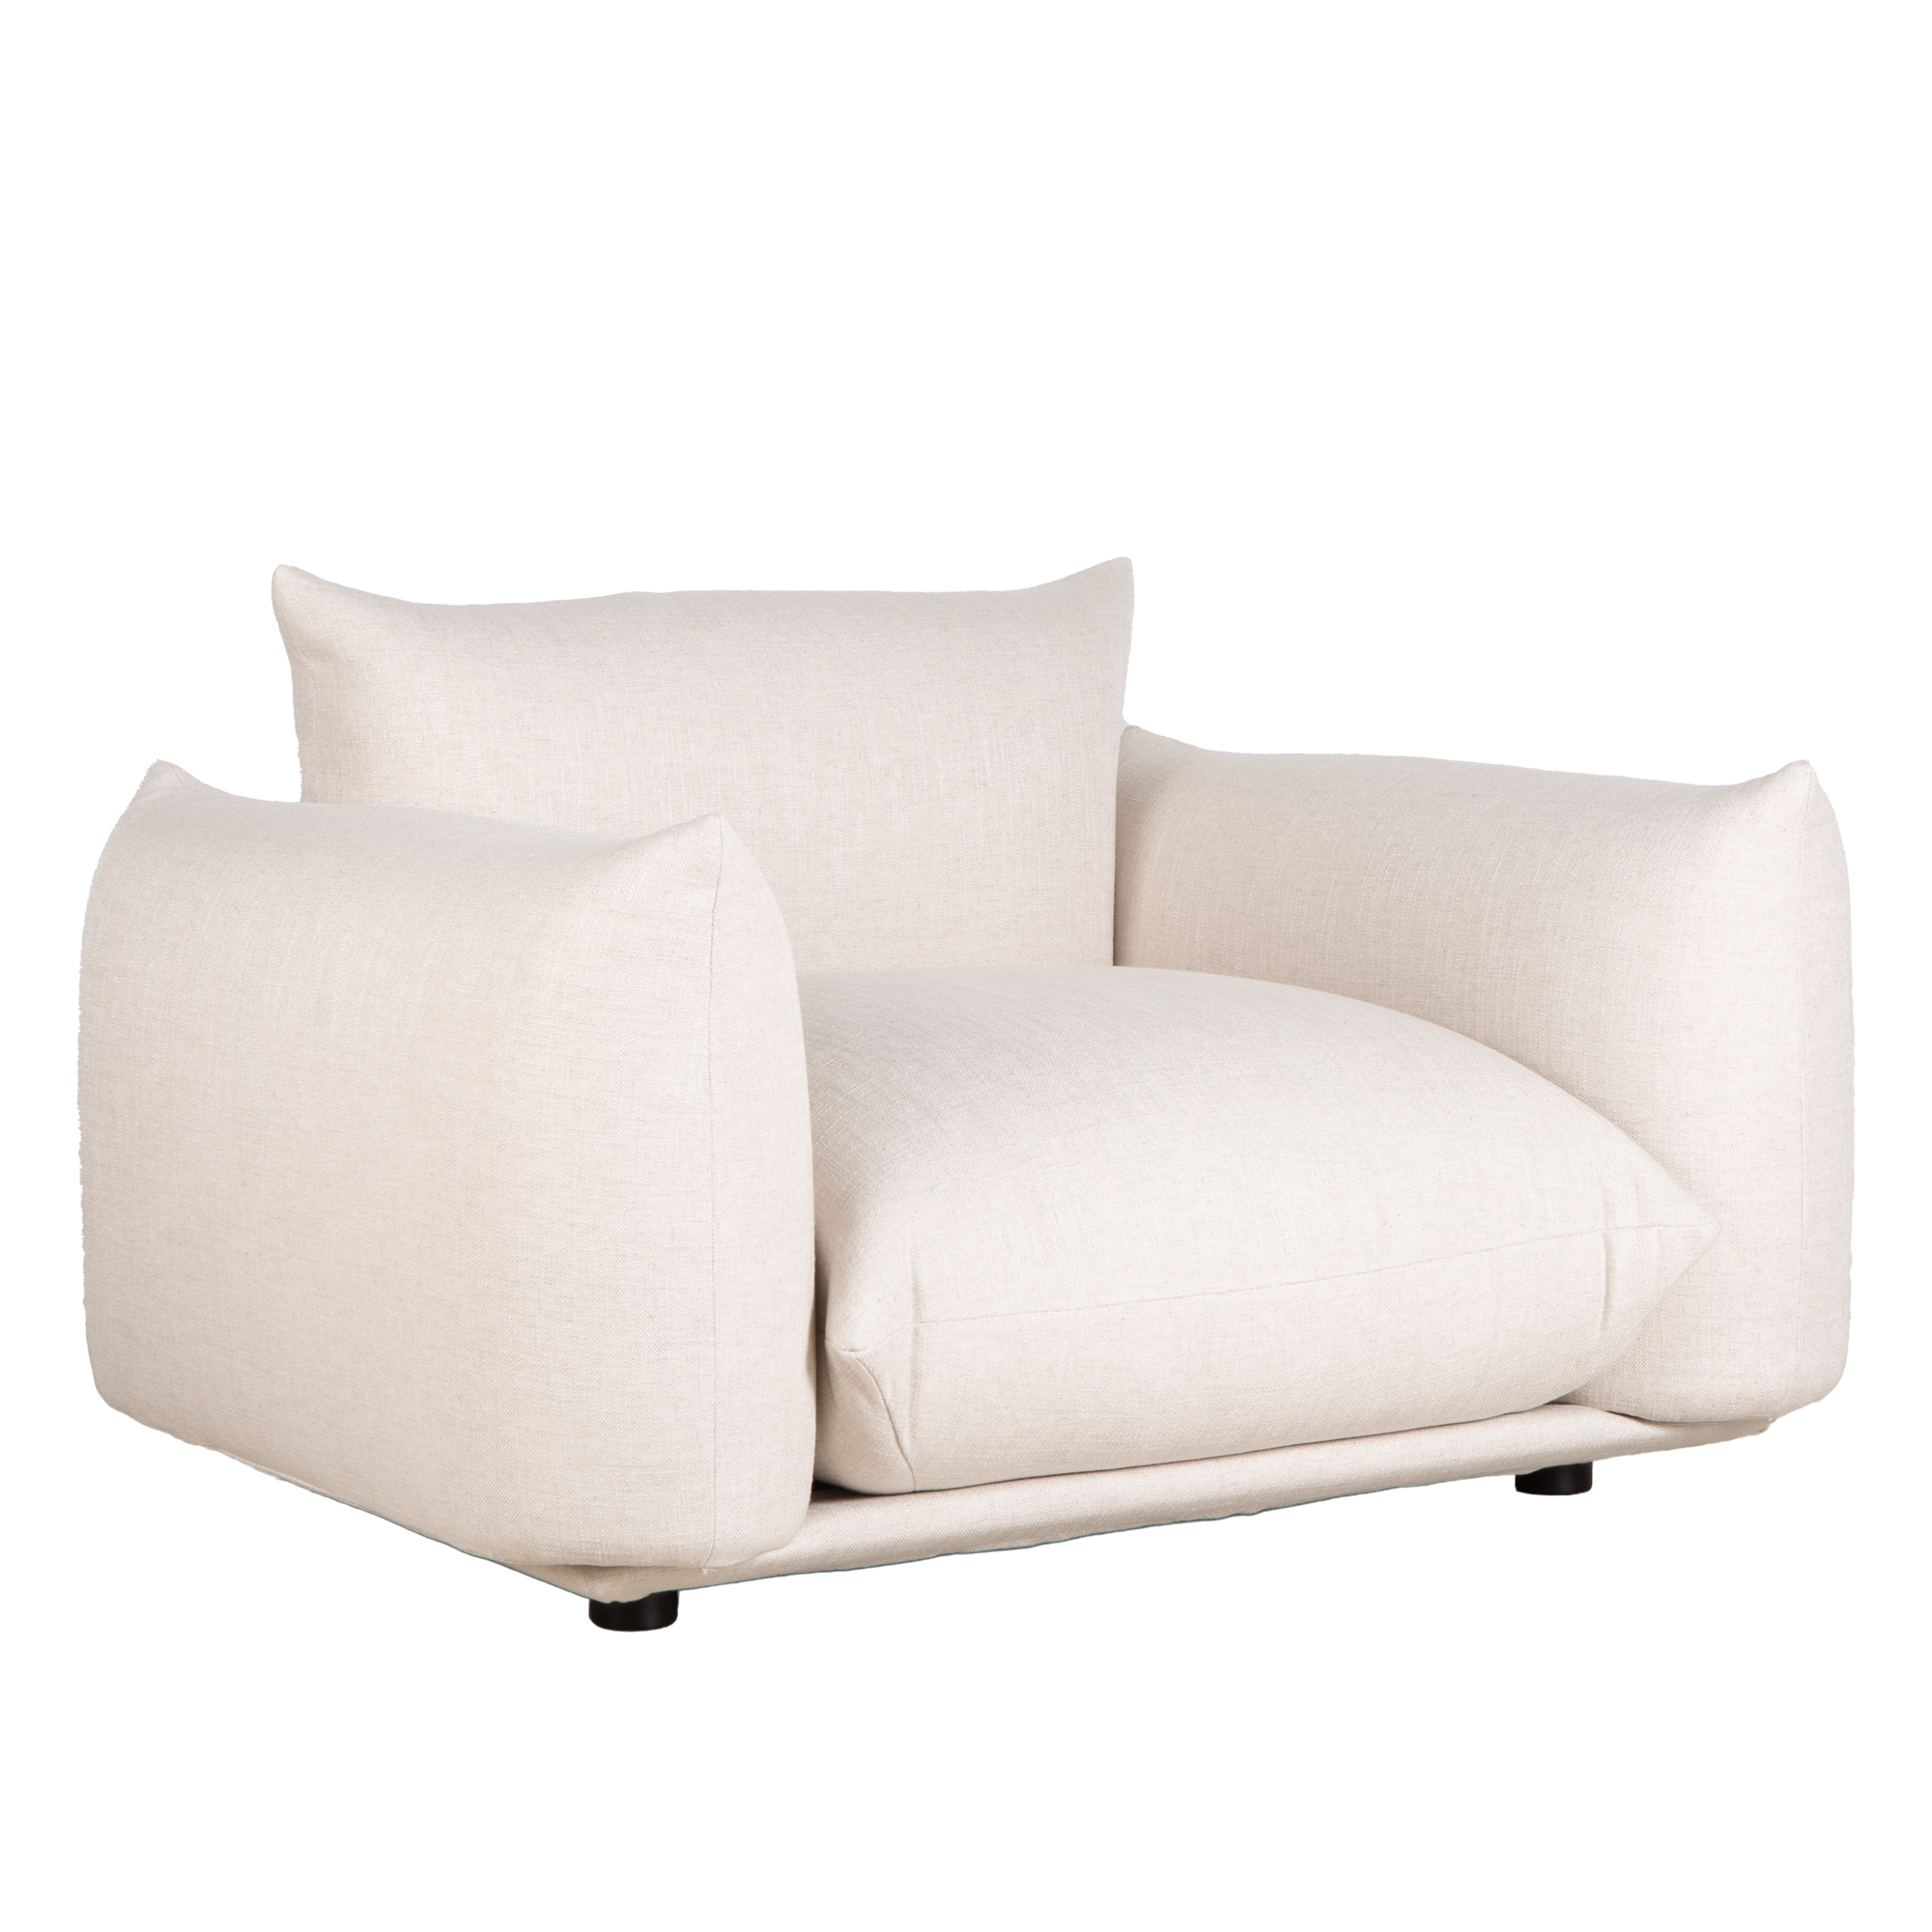 The Marenco Armchair transcends conventional boundaries and embodies a perfect fusion of form, function, and unparalleled comfort.